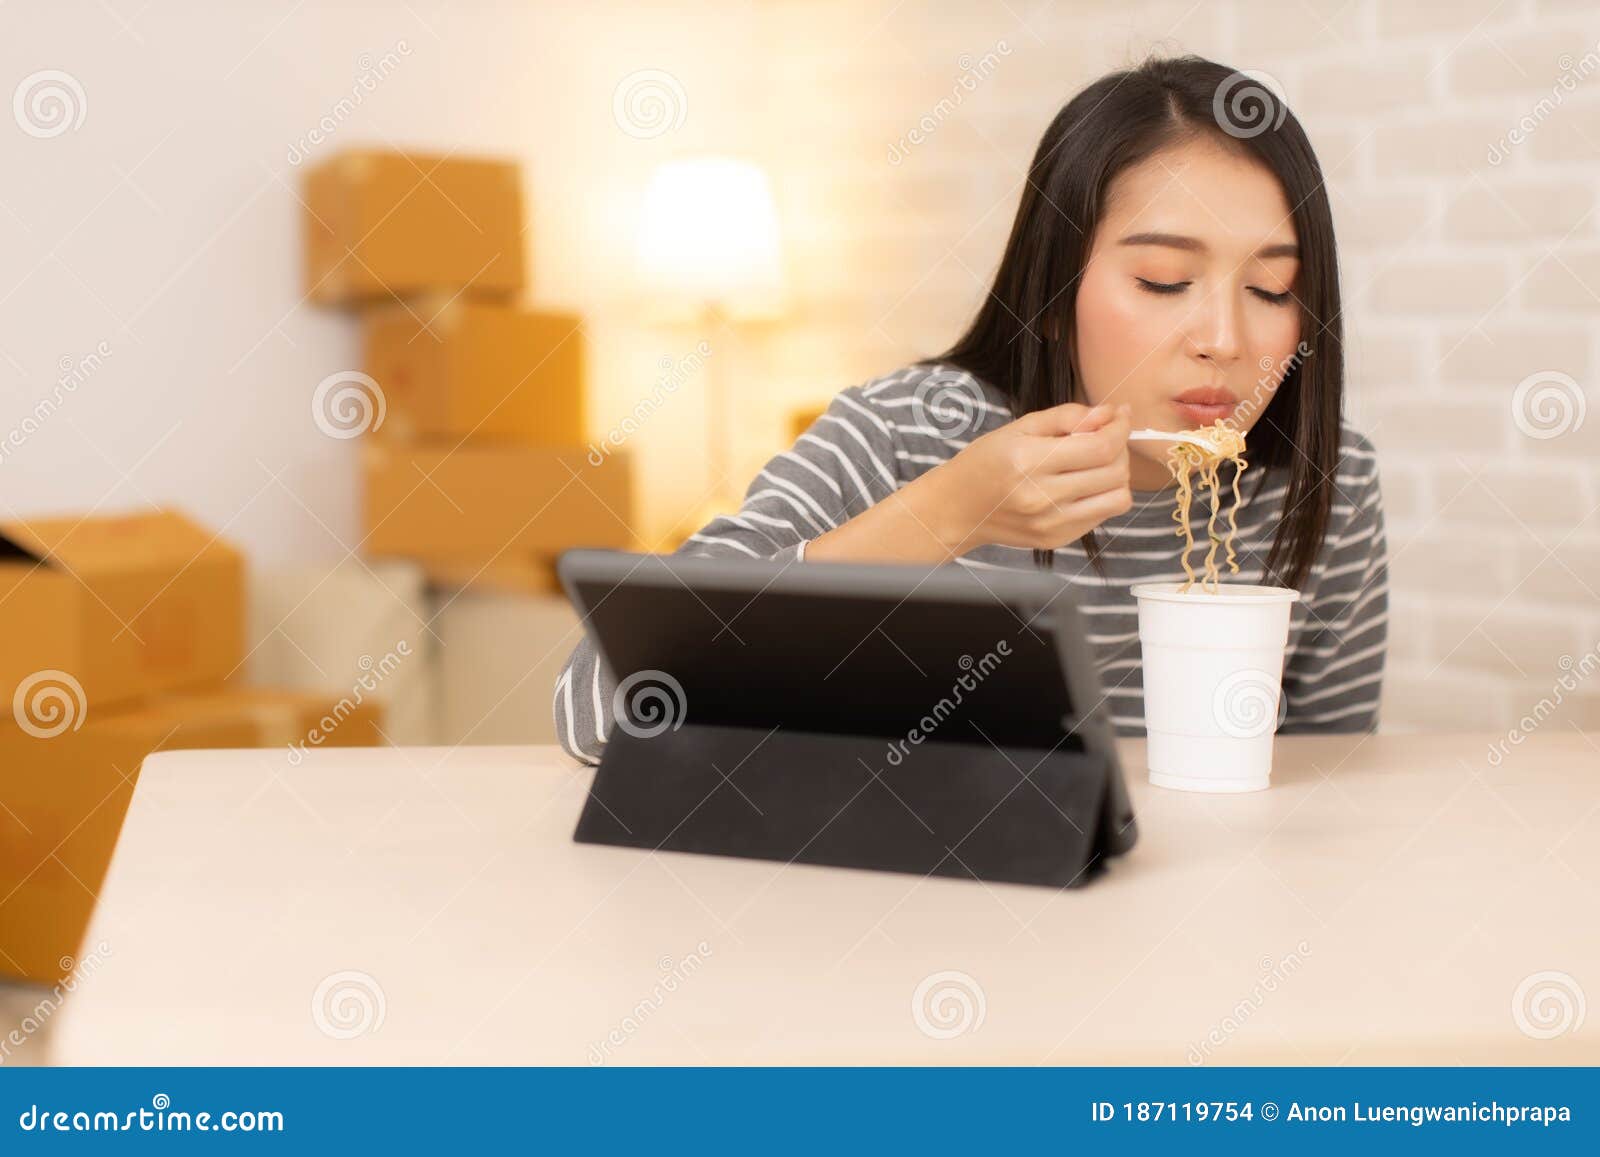 asia freelance  business woman eating instant noodles while working on laptop in living room at home office at night. young asian